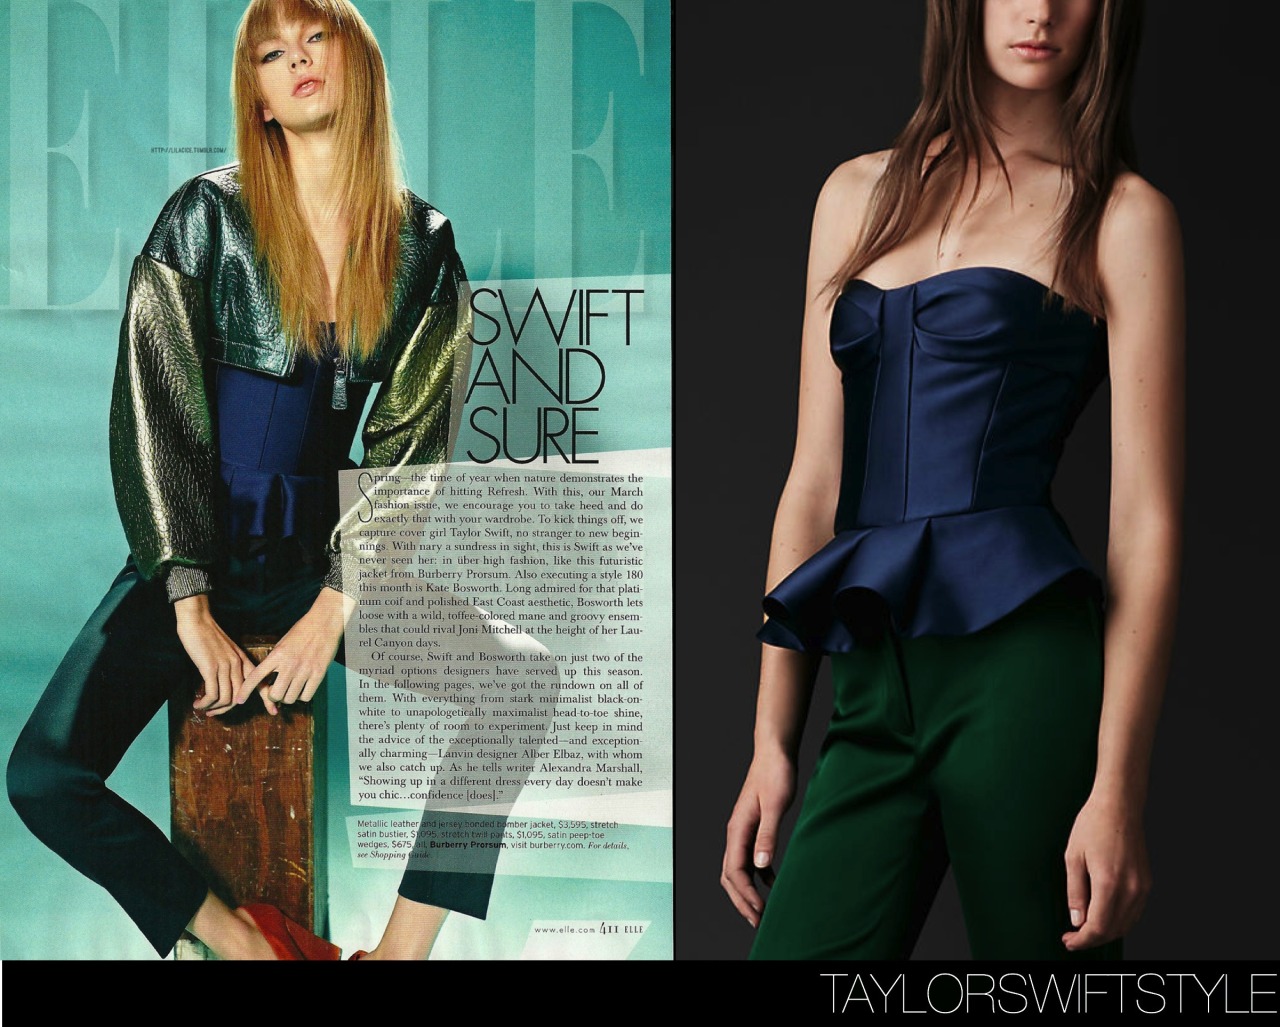 In a photo spread for Elle magazine | March 2013Burberry Prorsum &#8216;Stretch Satin Bustier&#8217; - $1095.00Worn with: Burberry Prorsum jacket and Burberry Prorsum wedgesGET THE LOOK: ASOS top